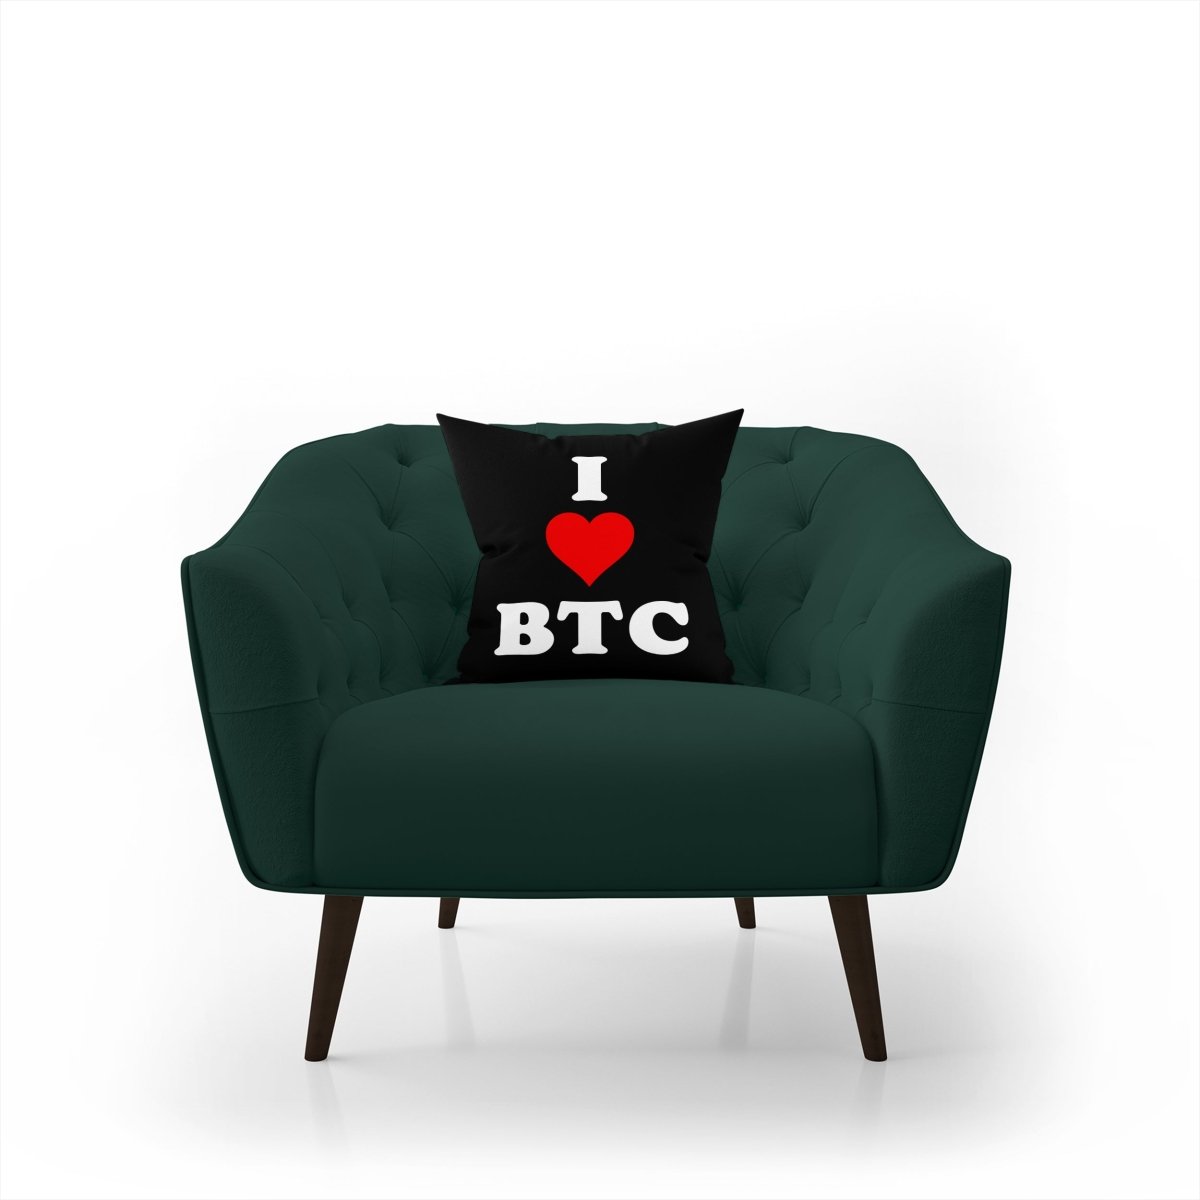 Cryptocurrency Gift Ideas - I Love BTC Pillow displayed on green armchair.